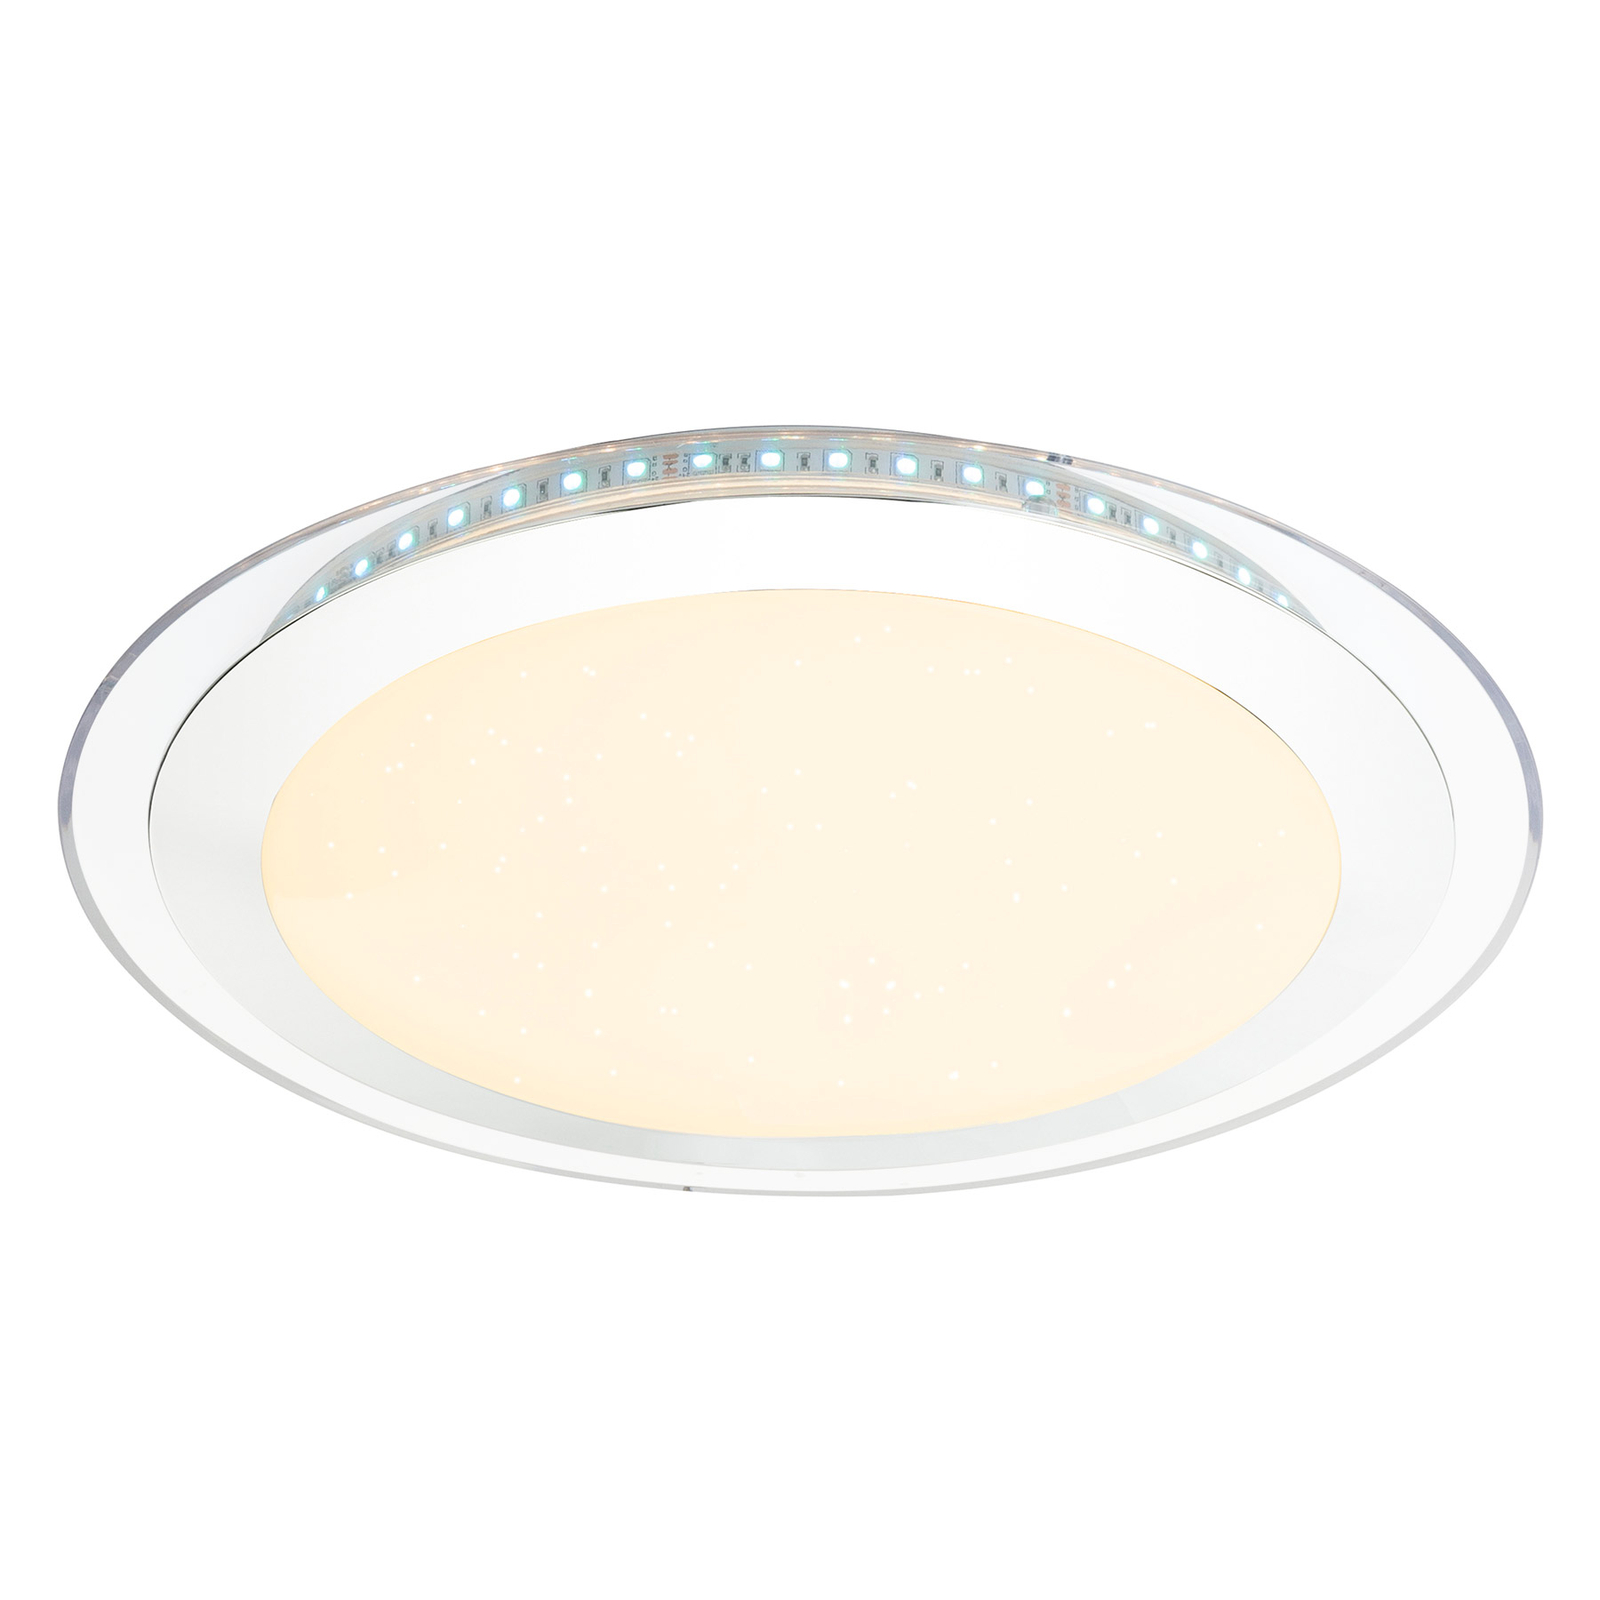 Nicole II LED ceiling light with remote control